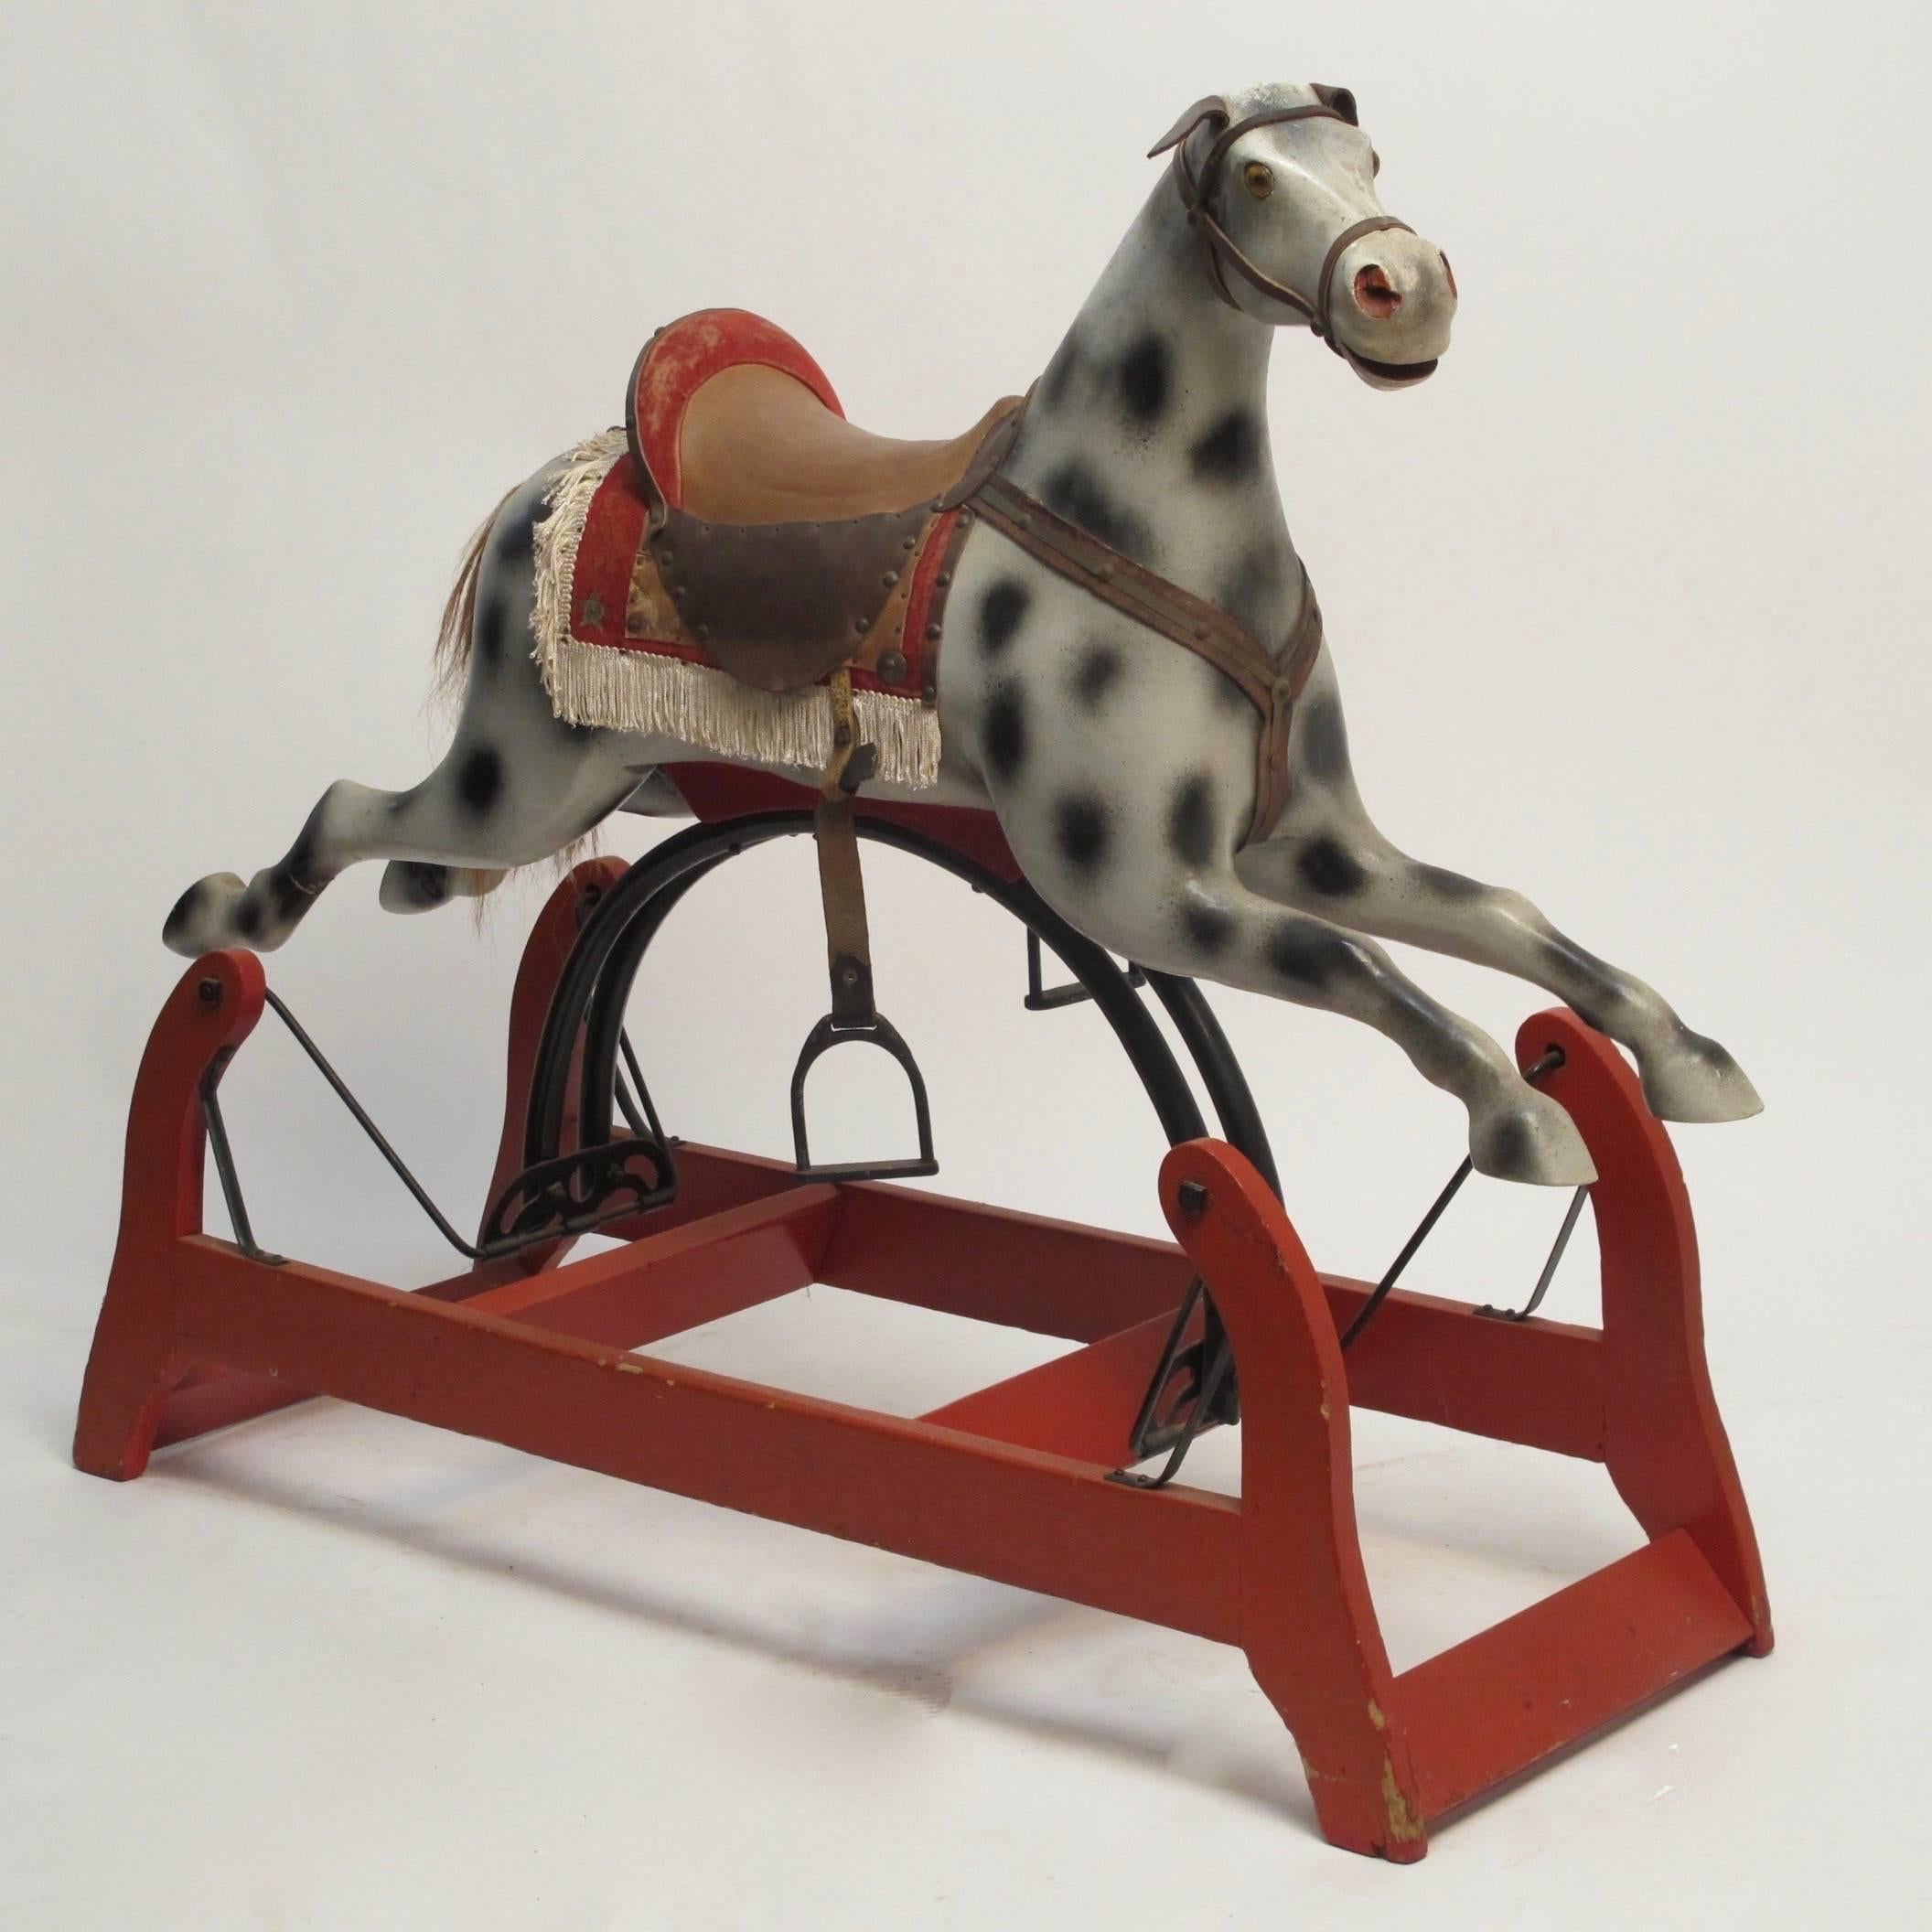 Charming old rocking horse. Painted wood, with leather and fabric saddle and iron stirrups. American, late 19th century-early 20th century.